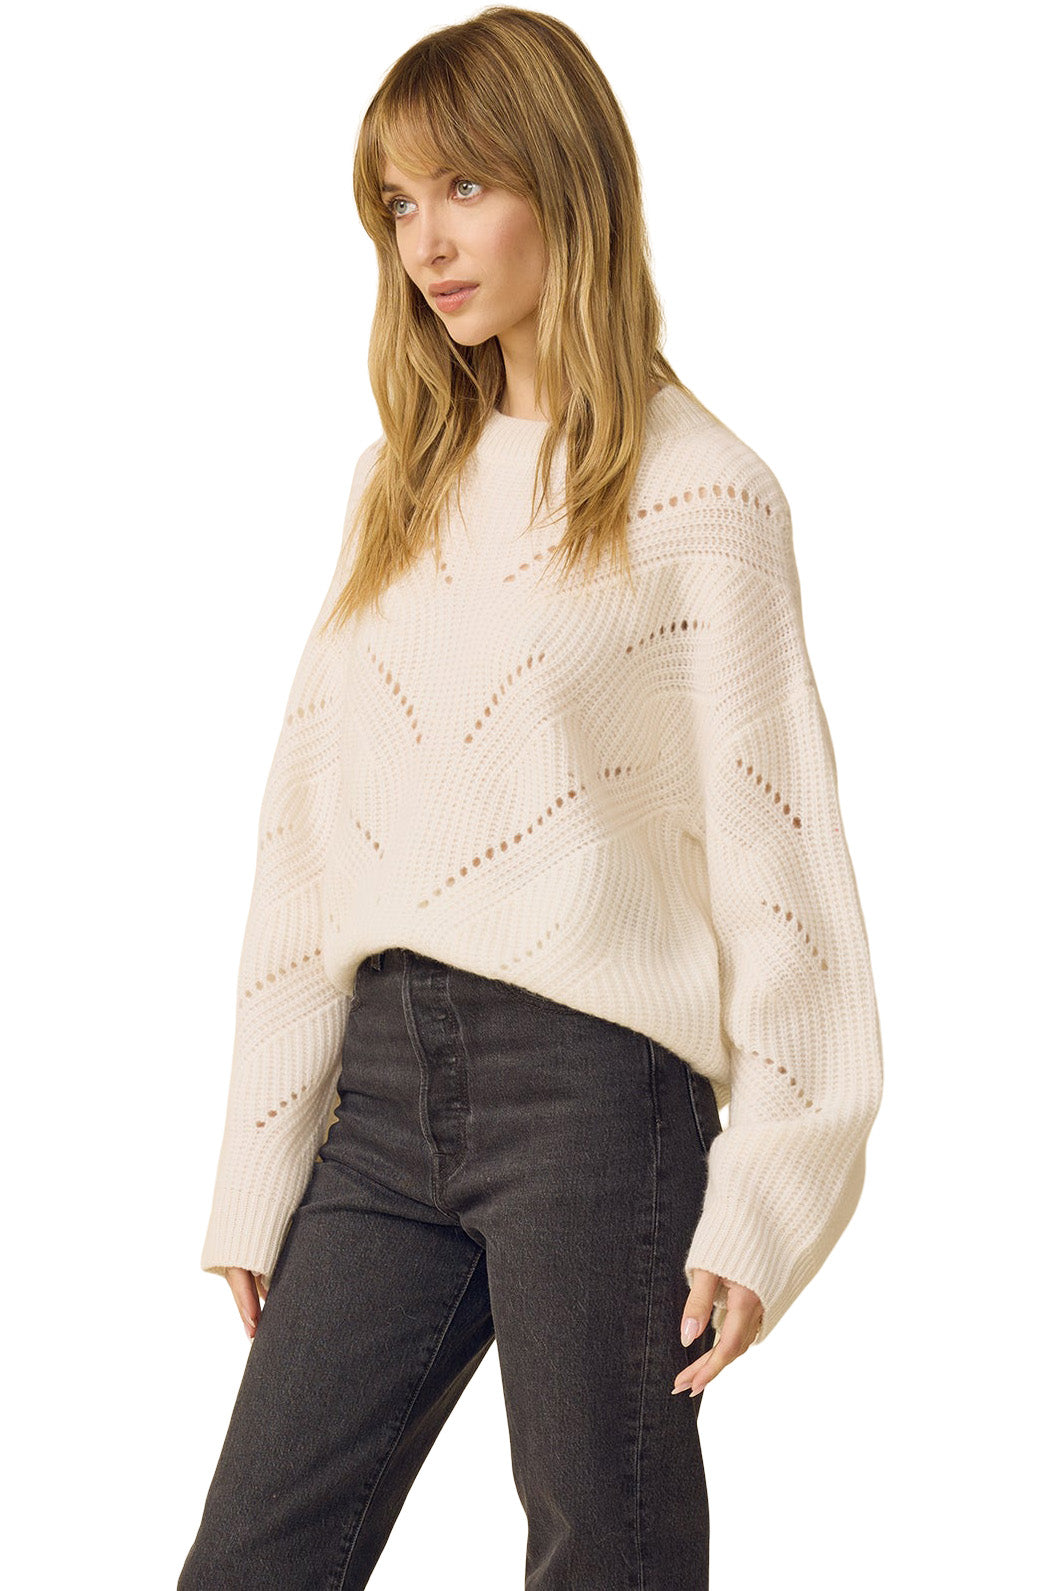 One Grey Day Amarilla Cashmere Pullover in Ivory